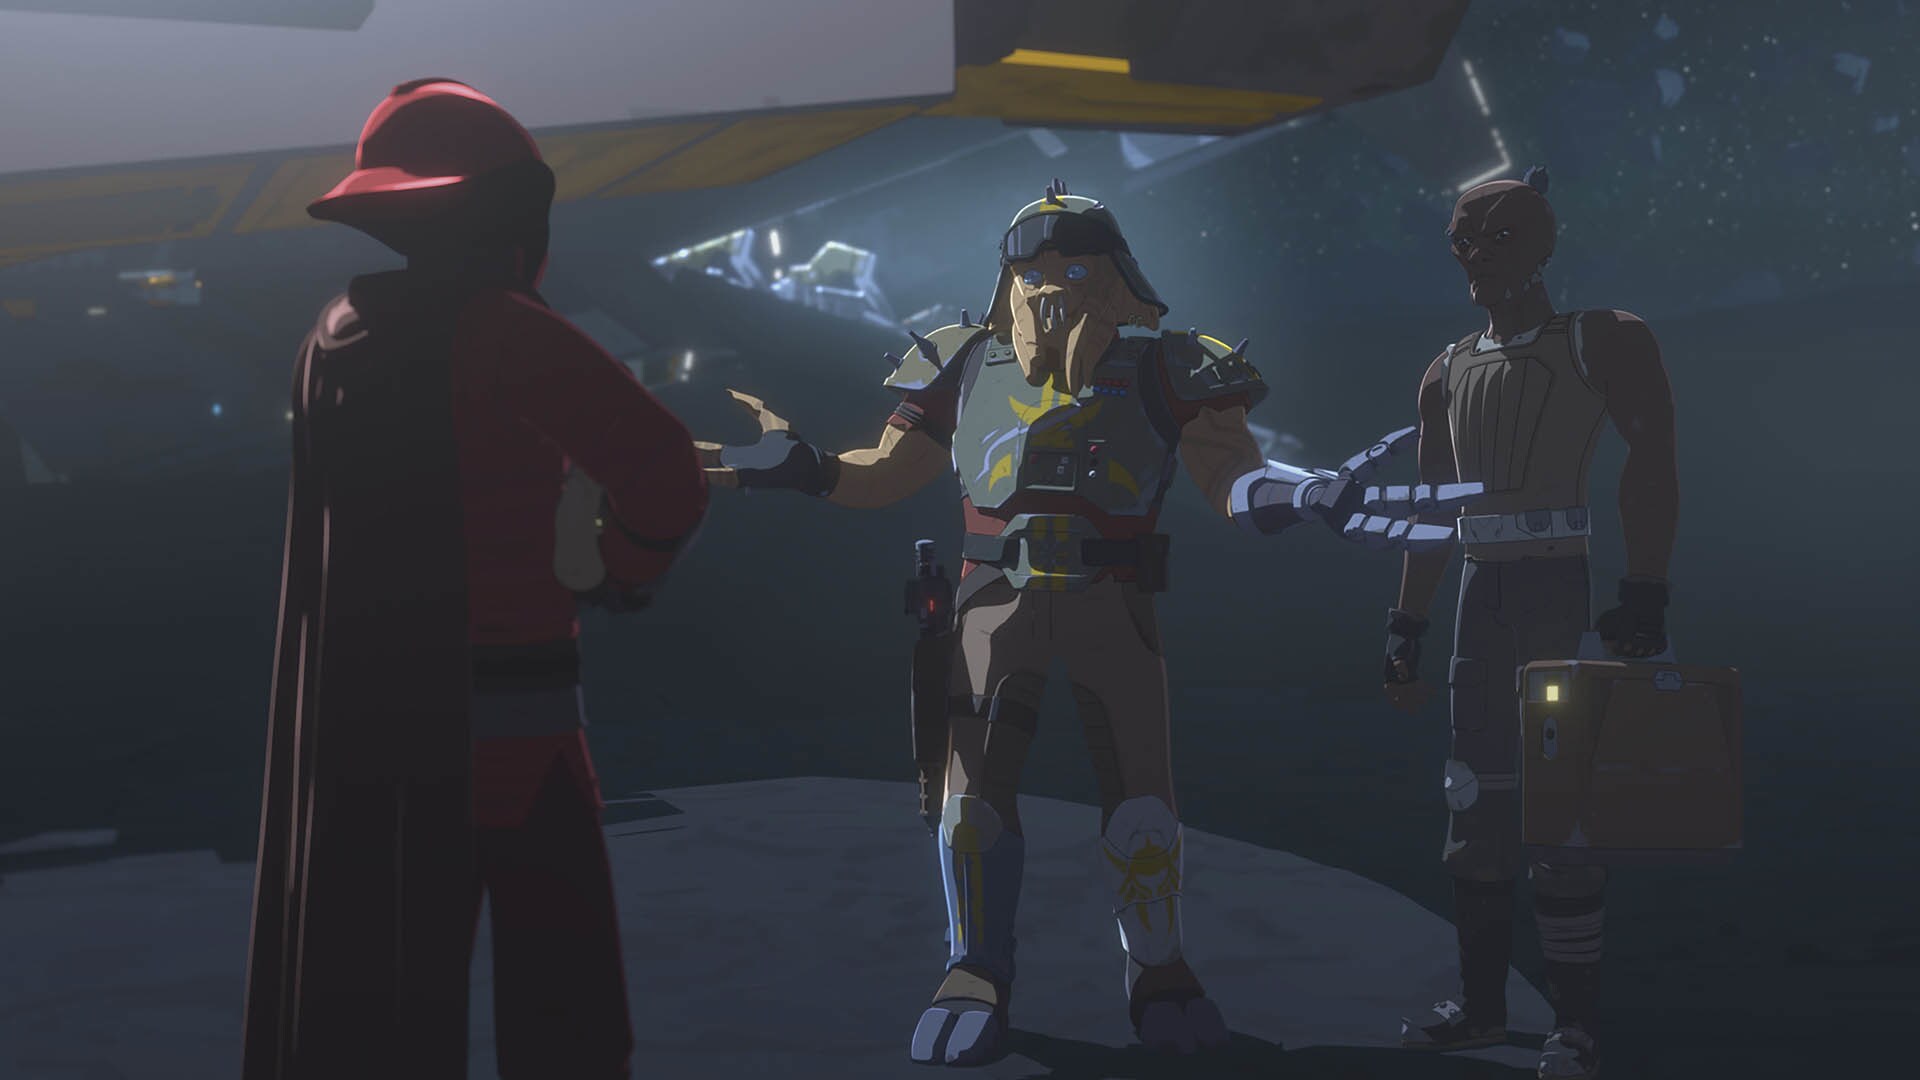 Kragan Gorr meets with Sidon Ithano at an undisclosed location to complete a deal: a sizeable amo...